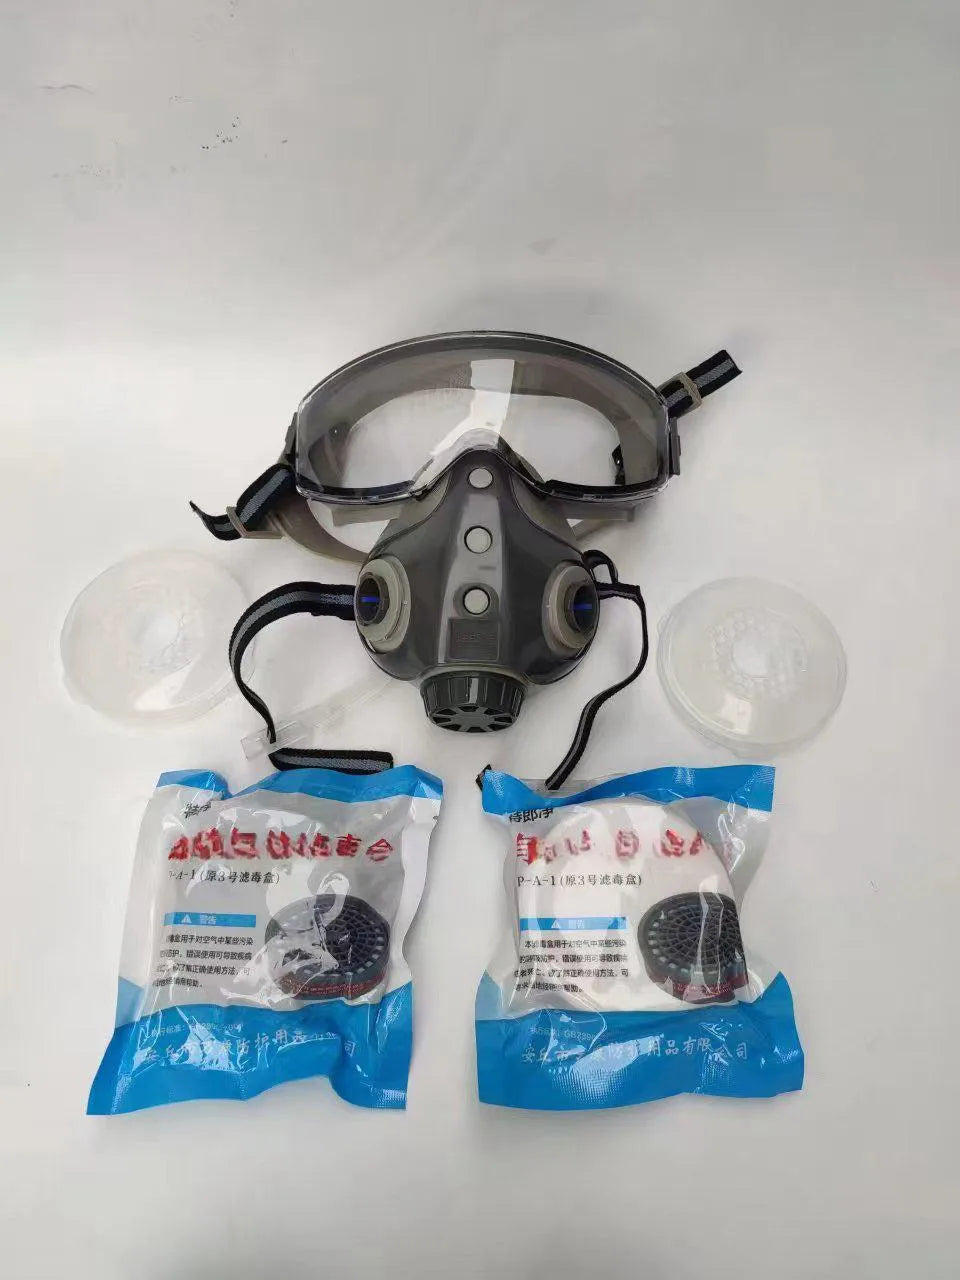 Reusable Respirator Half-face Dust Mask Integrated With Goggles Spray Paint Industrial Dust-proof Coal Mine Work Woodworking